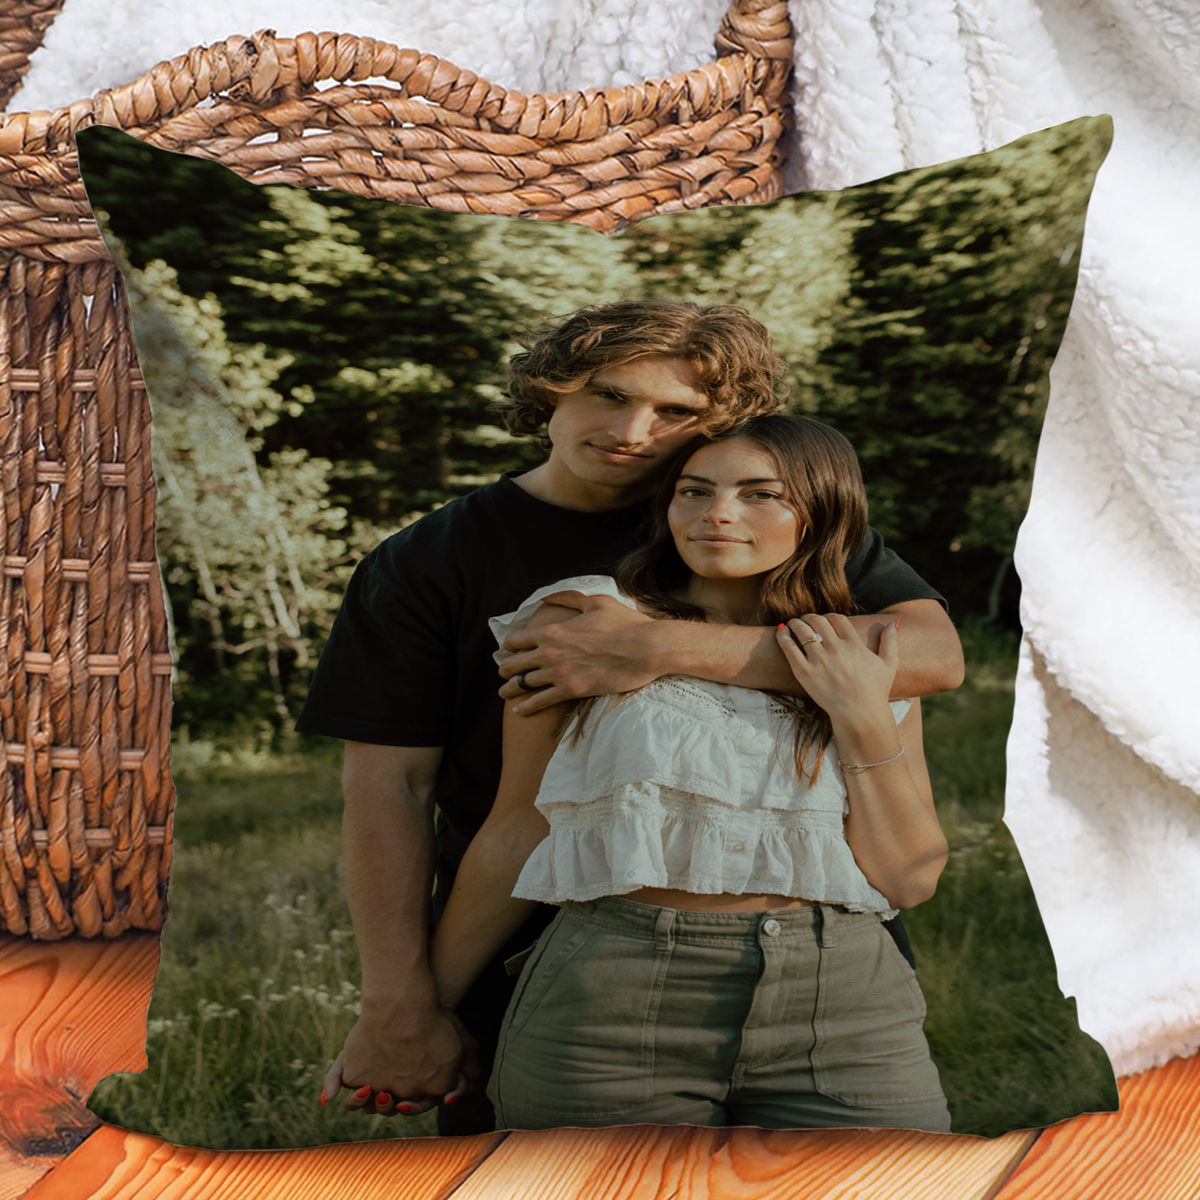 Photo Pillow - Photo Upload - Pillow For Couple - Gift For Couple, Wedding, Photo Gifts For Couple_2